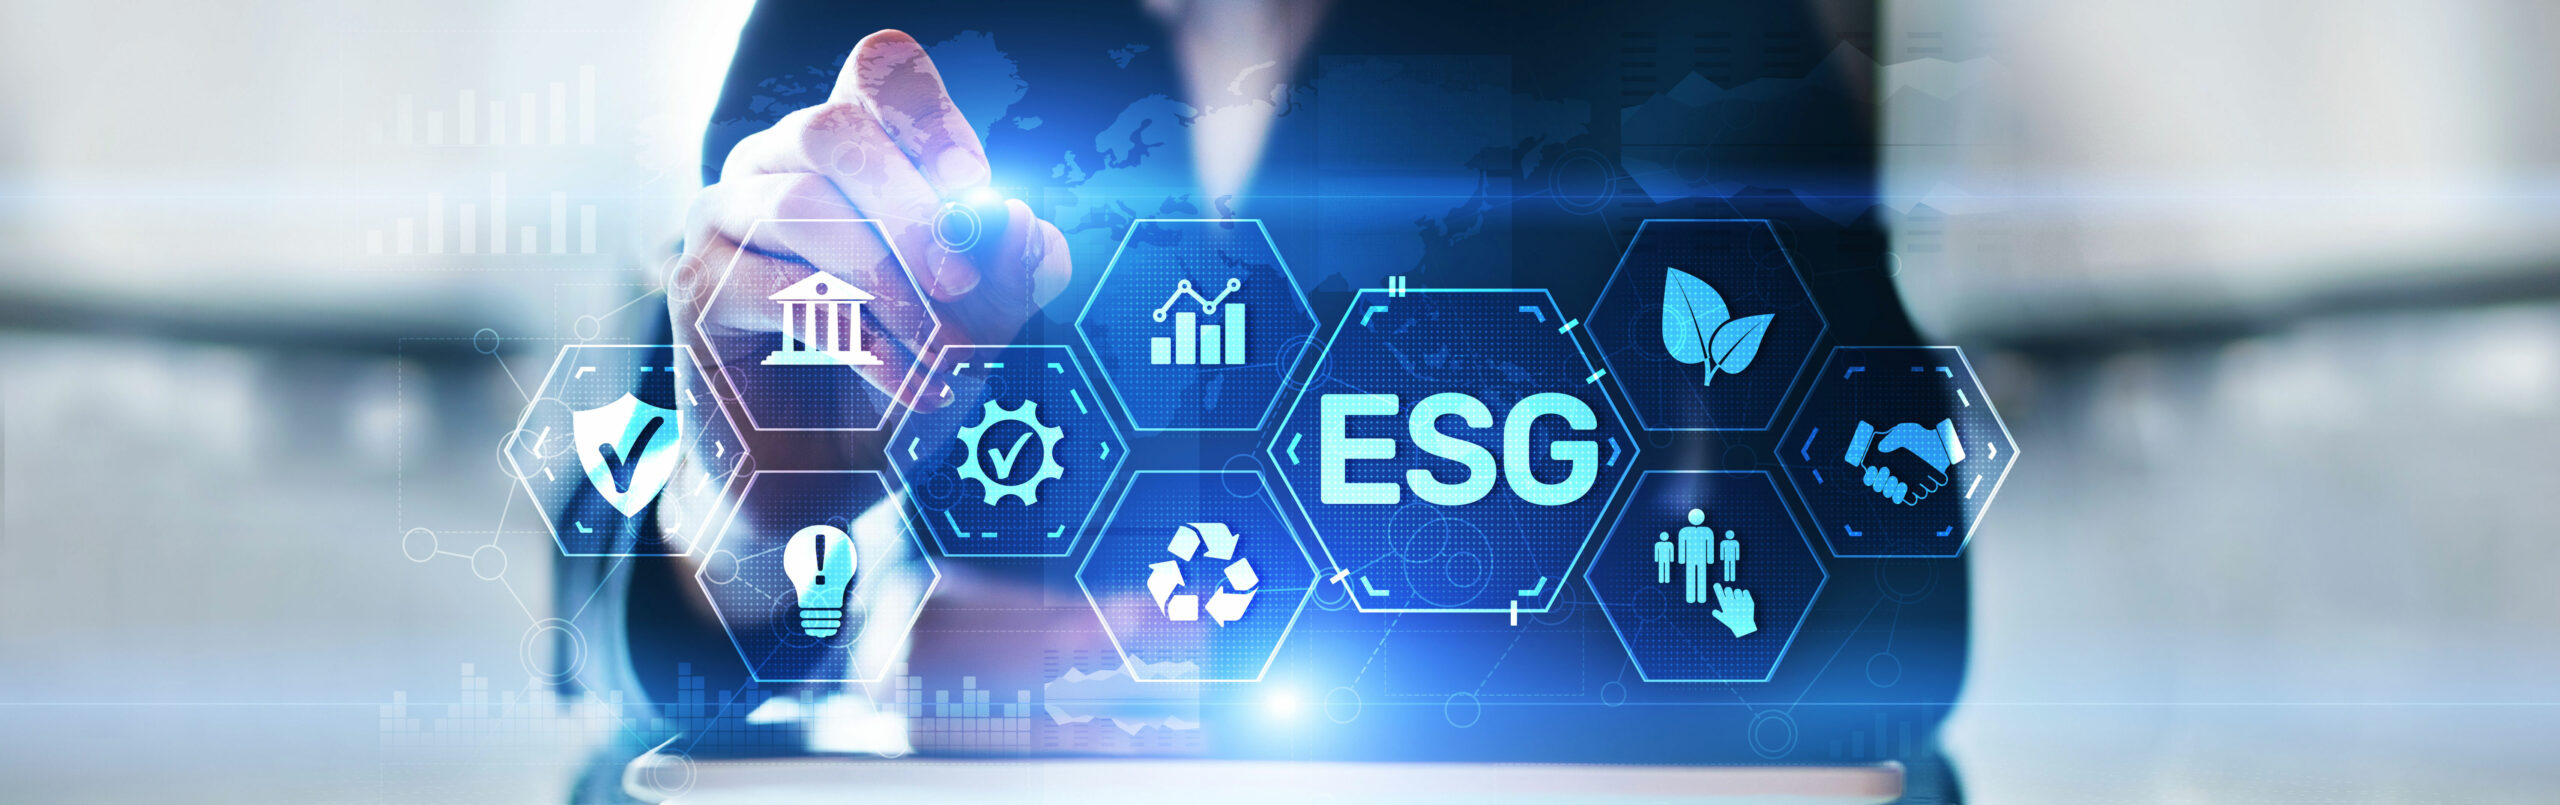 Reliably meet ESG requirements for buildings with bascloud